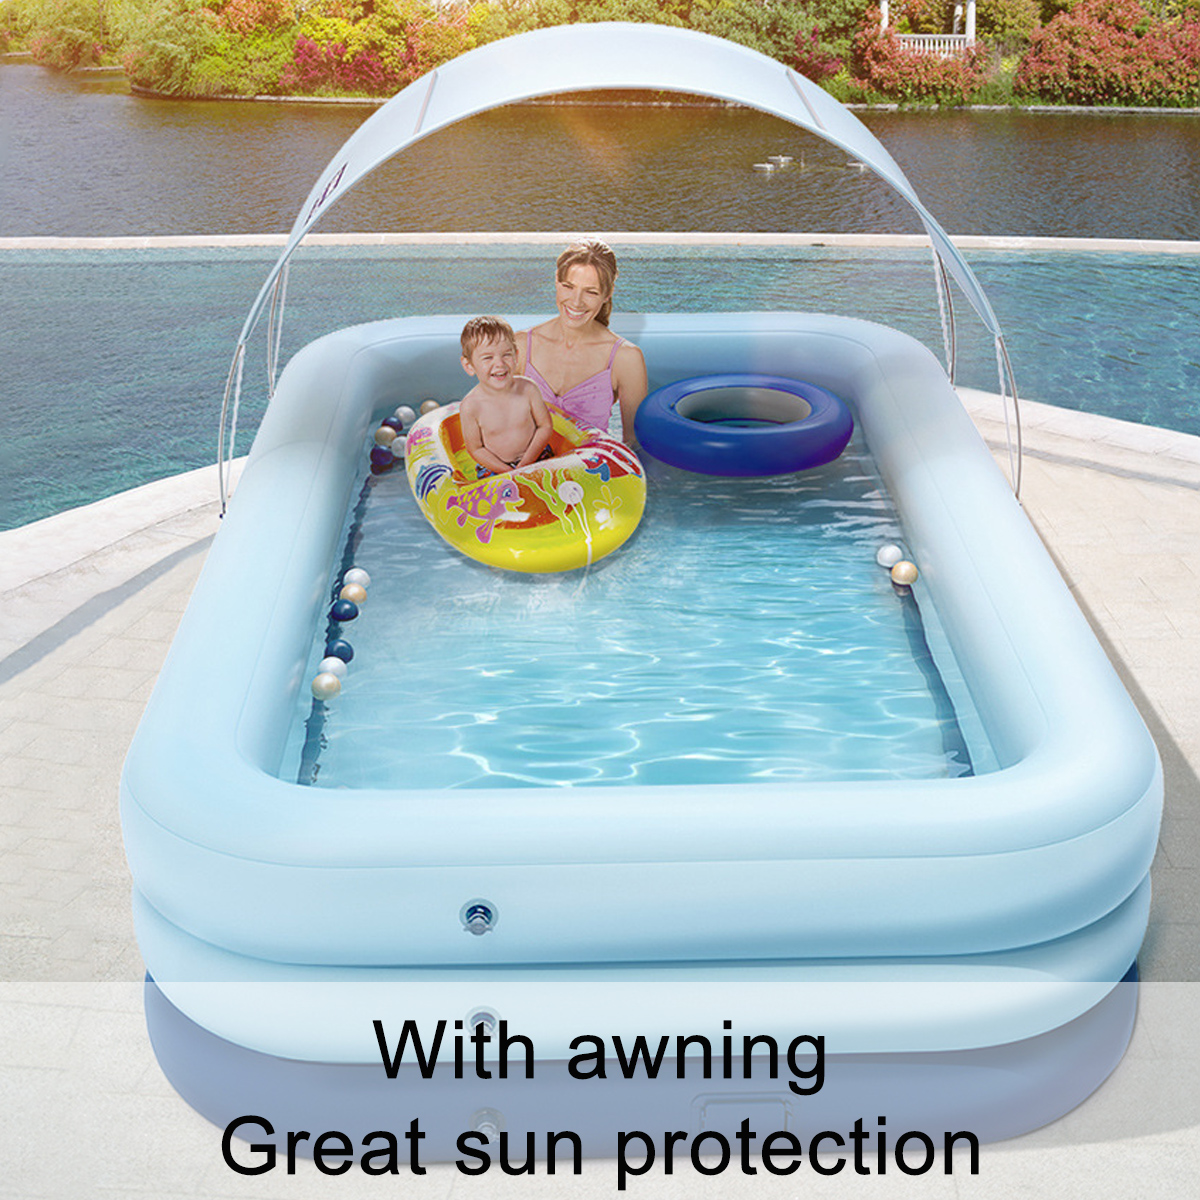 10Ft-Automatic-Inflatable-Swimming-Pool-Family-Bath-Pools-Paddling-Pools-with-Sunshade-Outdoor-Garde-1857043-2